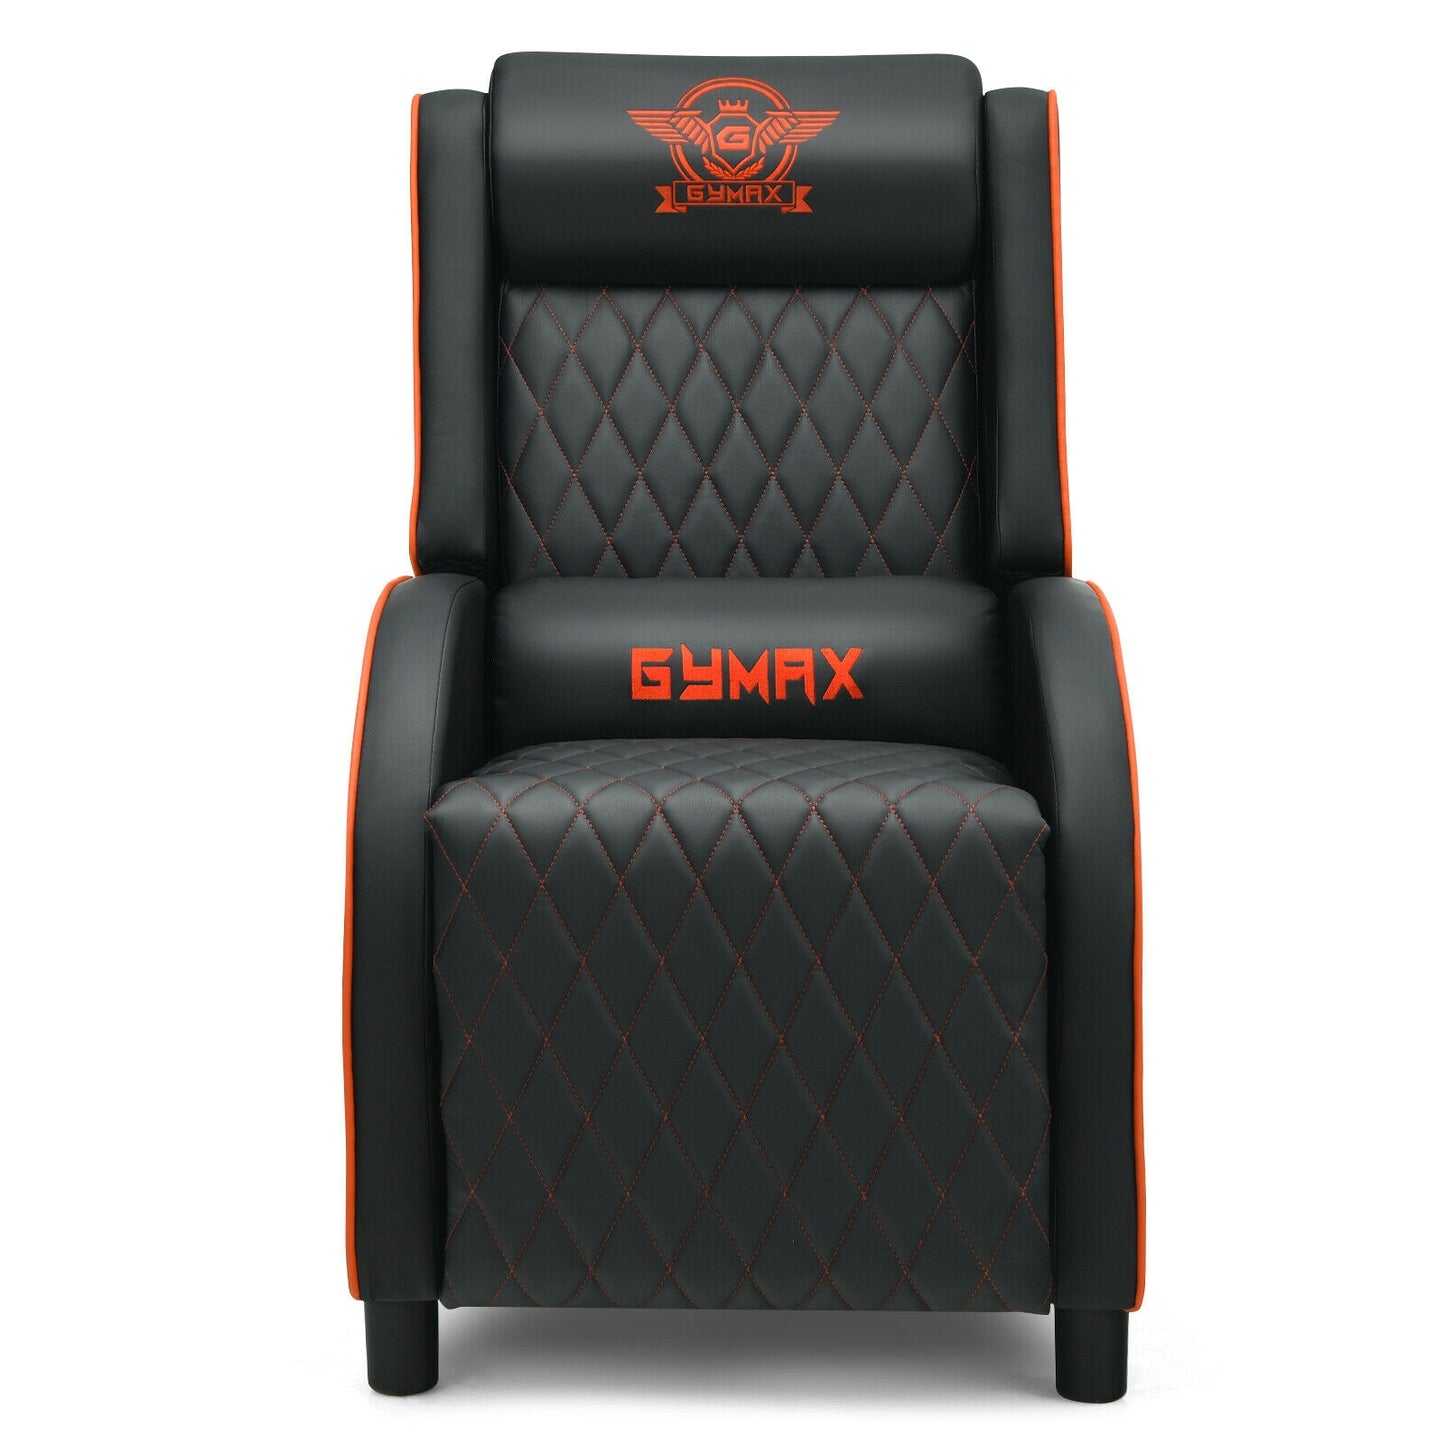 Massage Gaming Recliner Chair with Headrest and Adjustable Backrest for Home Theater-Orange